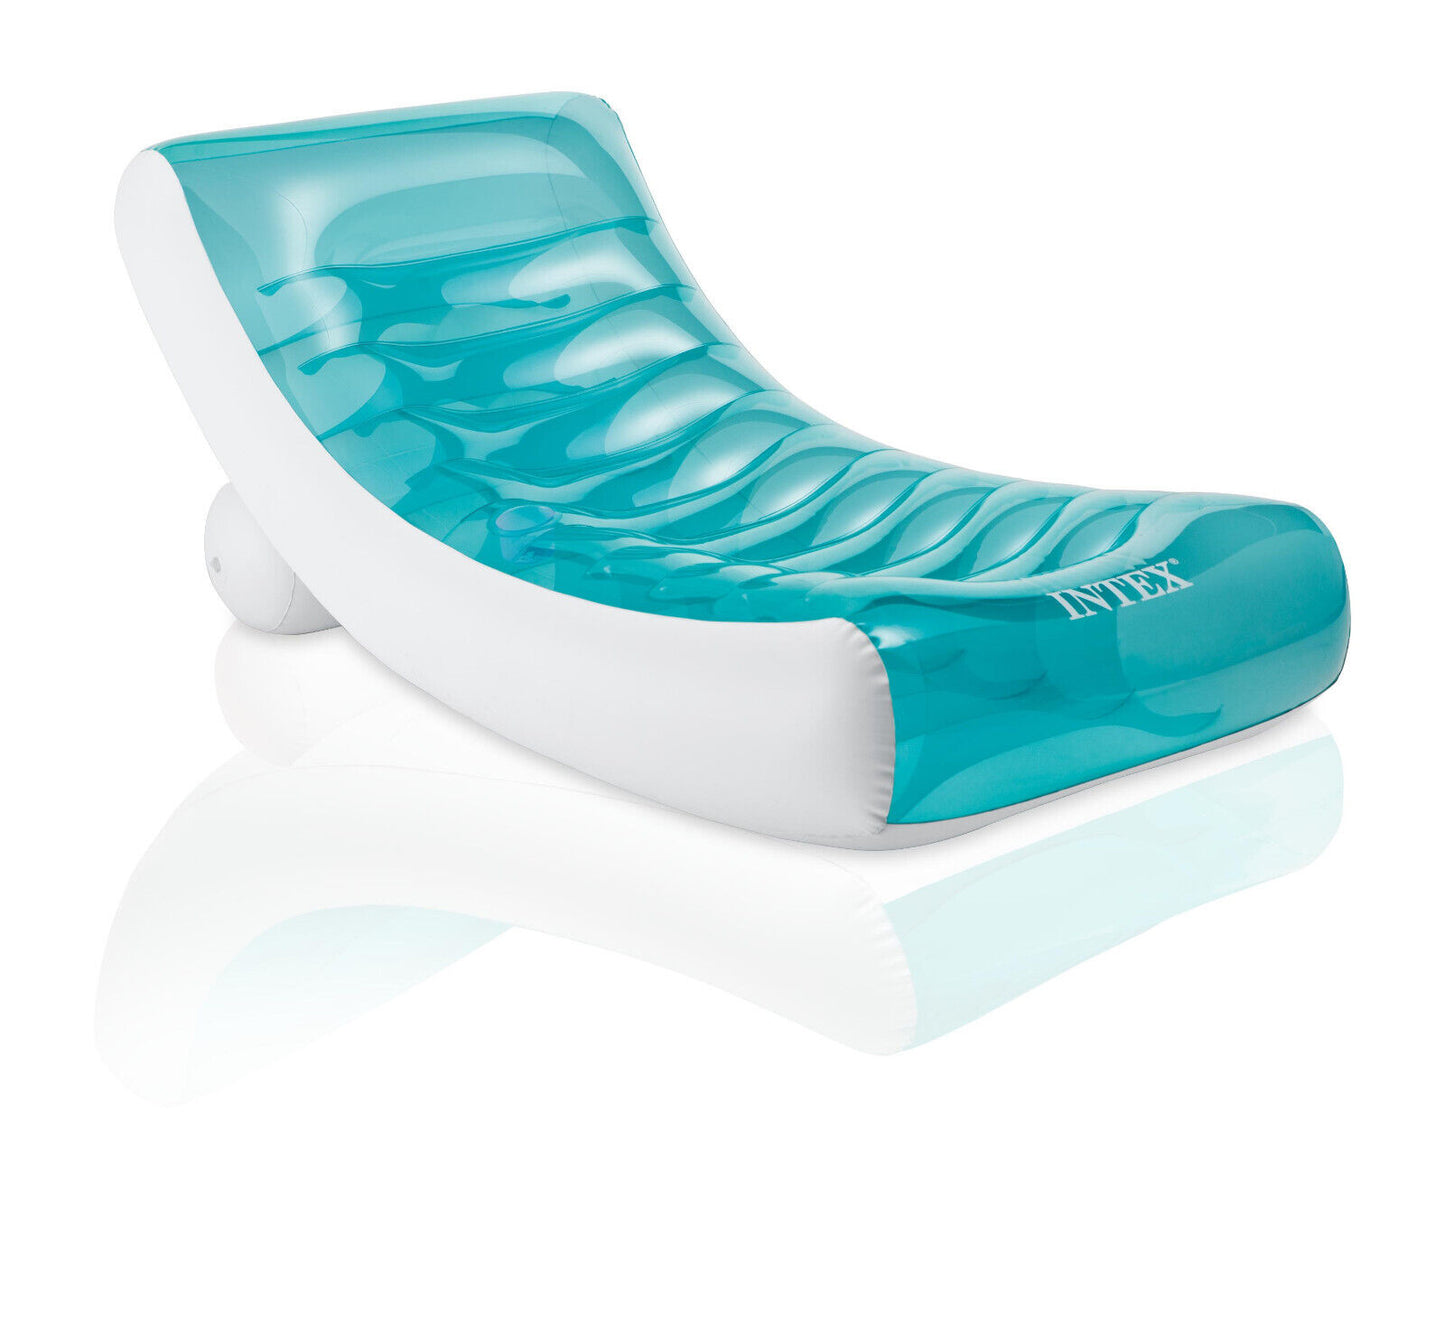 Intex ROCKIN' Pool Lounge Inflatable Swimming Floating Chair Lounge